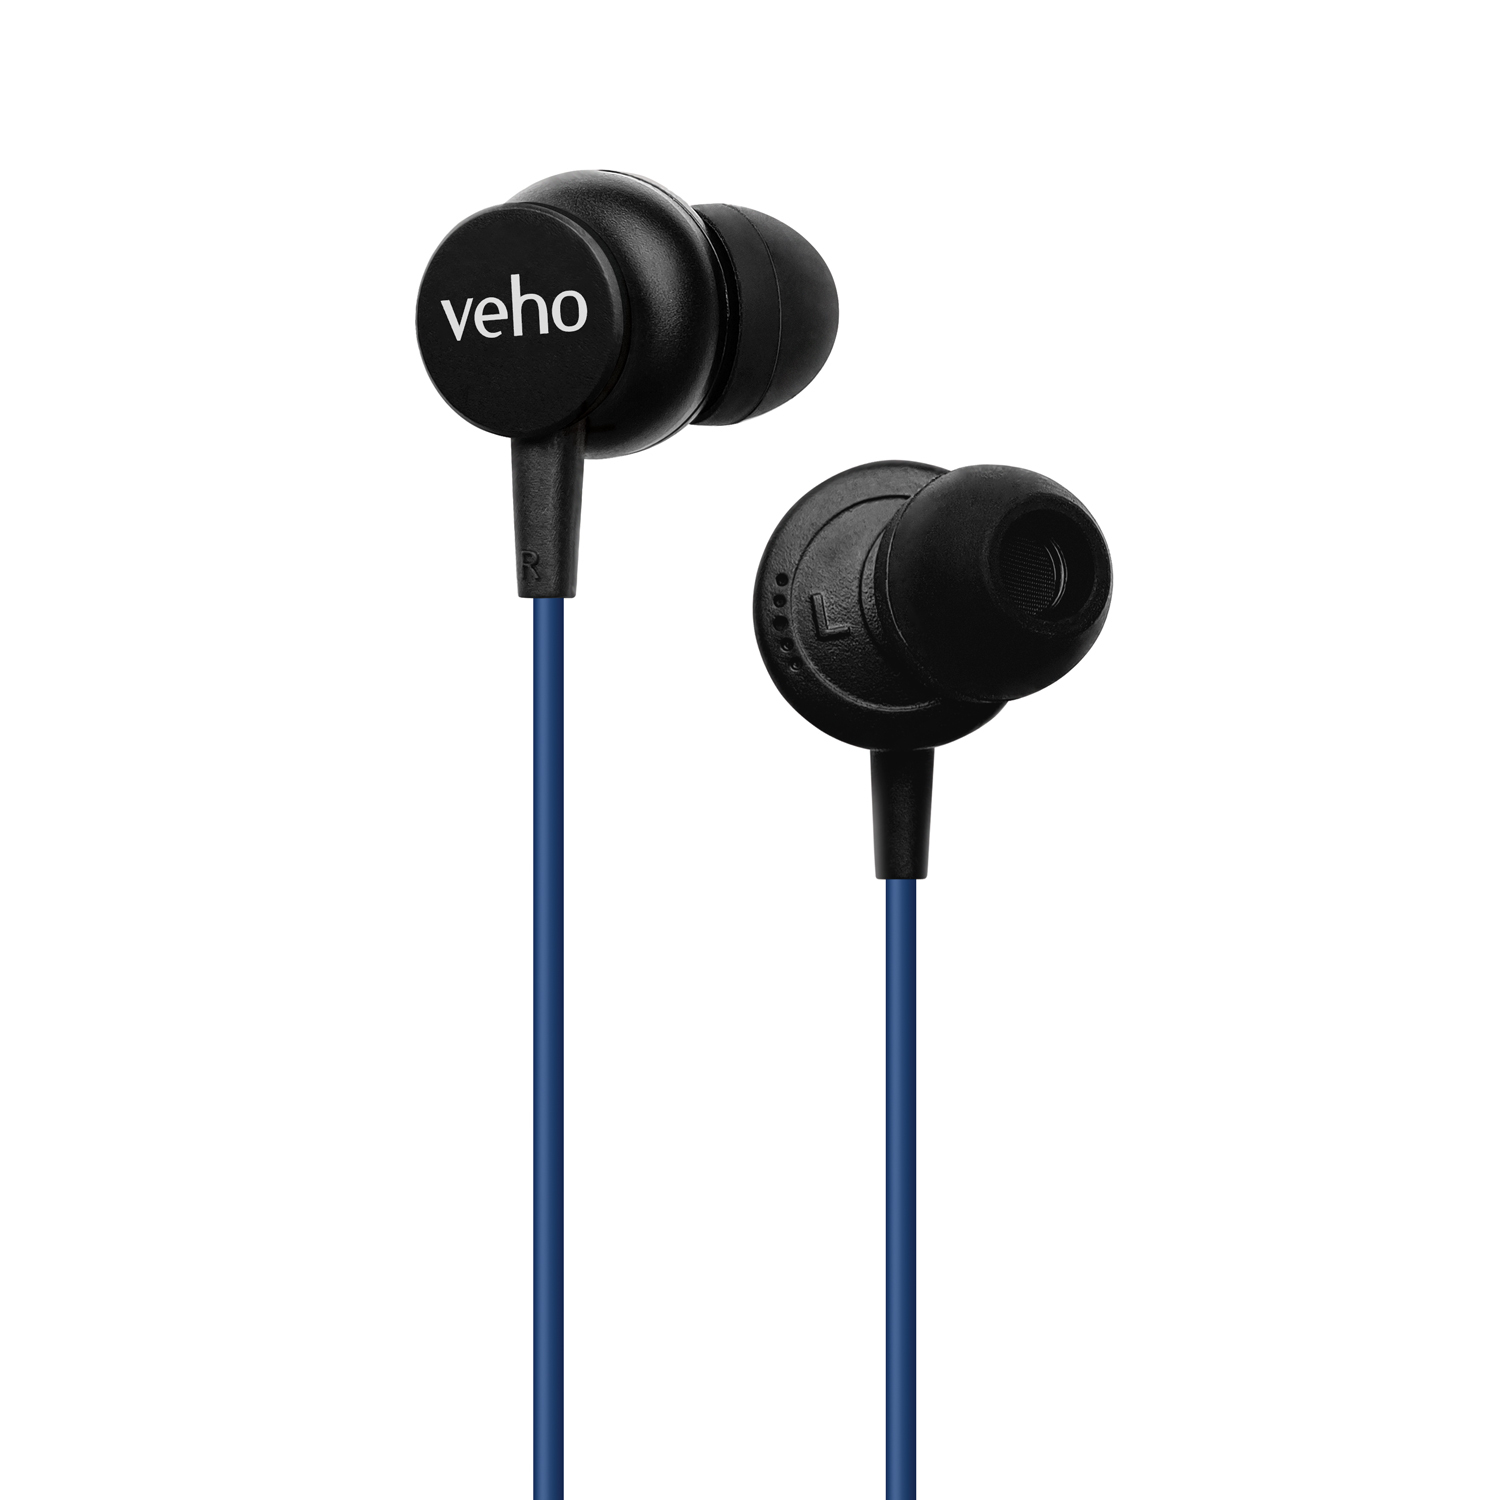 Veho Z-3 In-Ear Stereo Headphones with Built-in Microphone and Remote Control  Black (VEP-104-Z3-B)